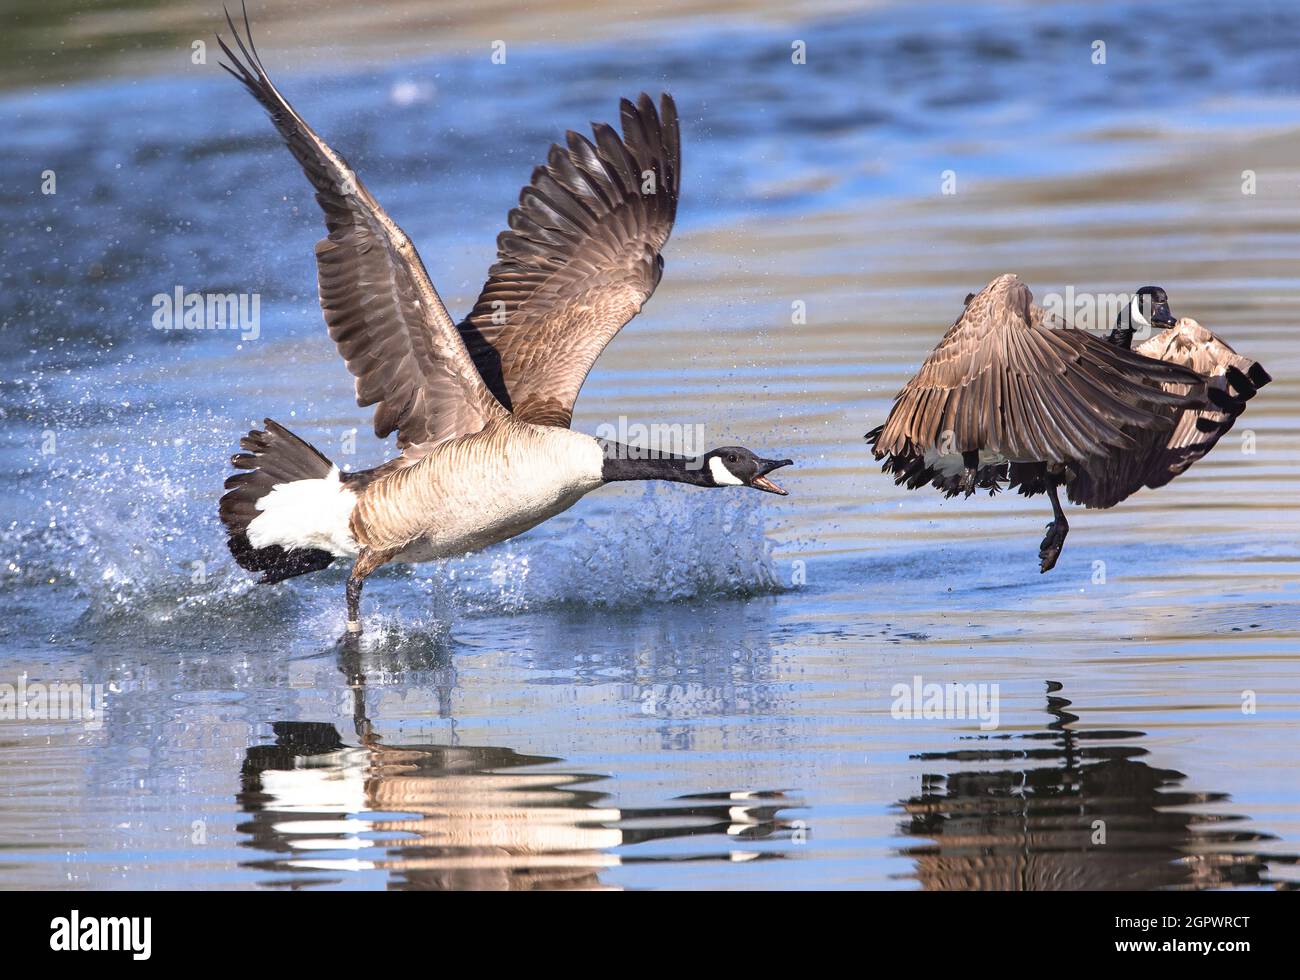 A Canada Goose stubbornly keeps up a spirited chase to drive another goose out of its territory. Stock Photo